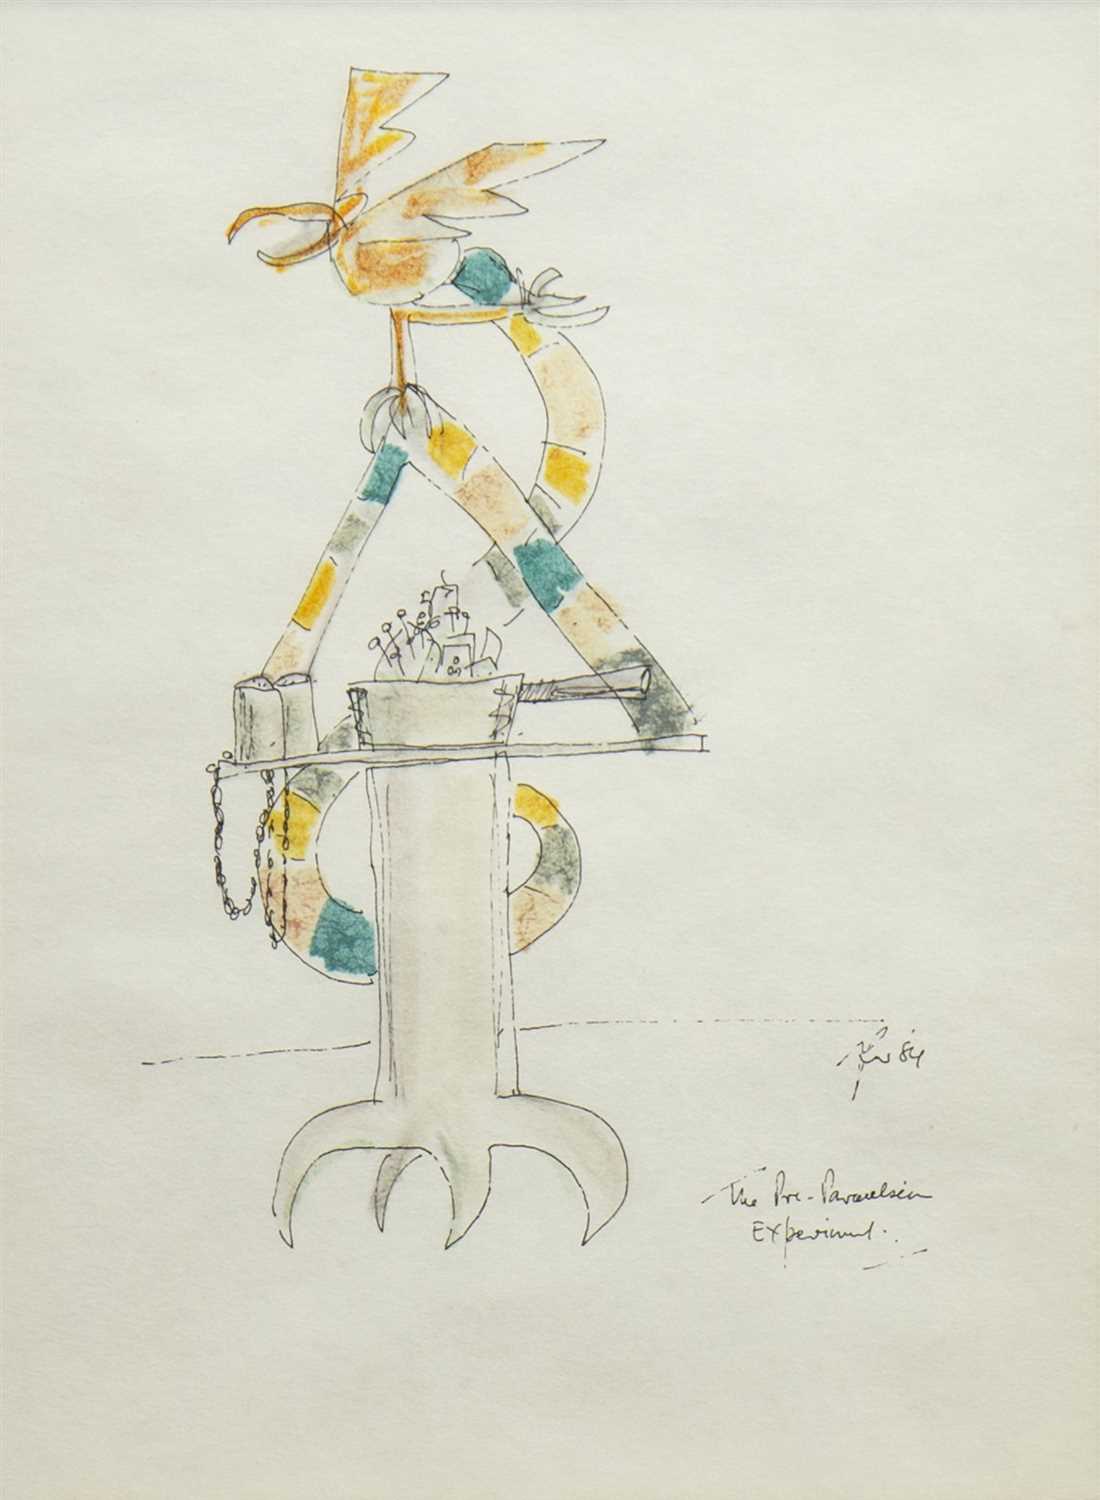 Lot 601 - THE EXPERIMENT, A PEN STUDY BY GEORGE WYLLIE